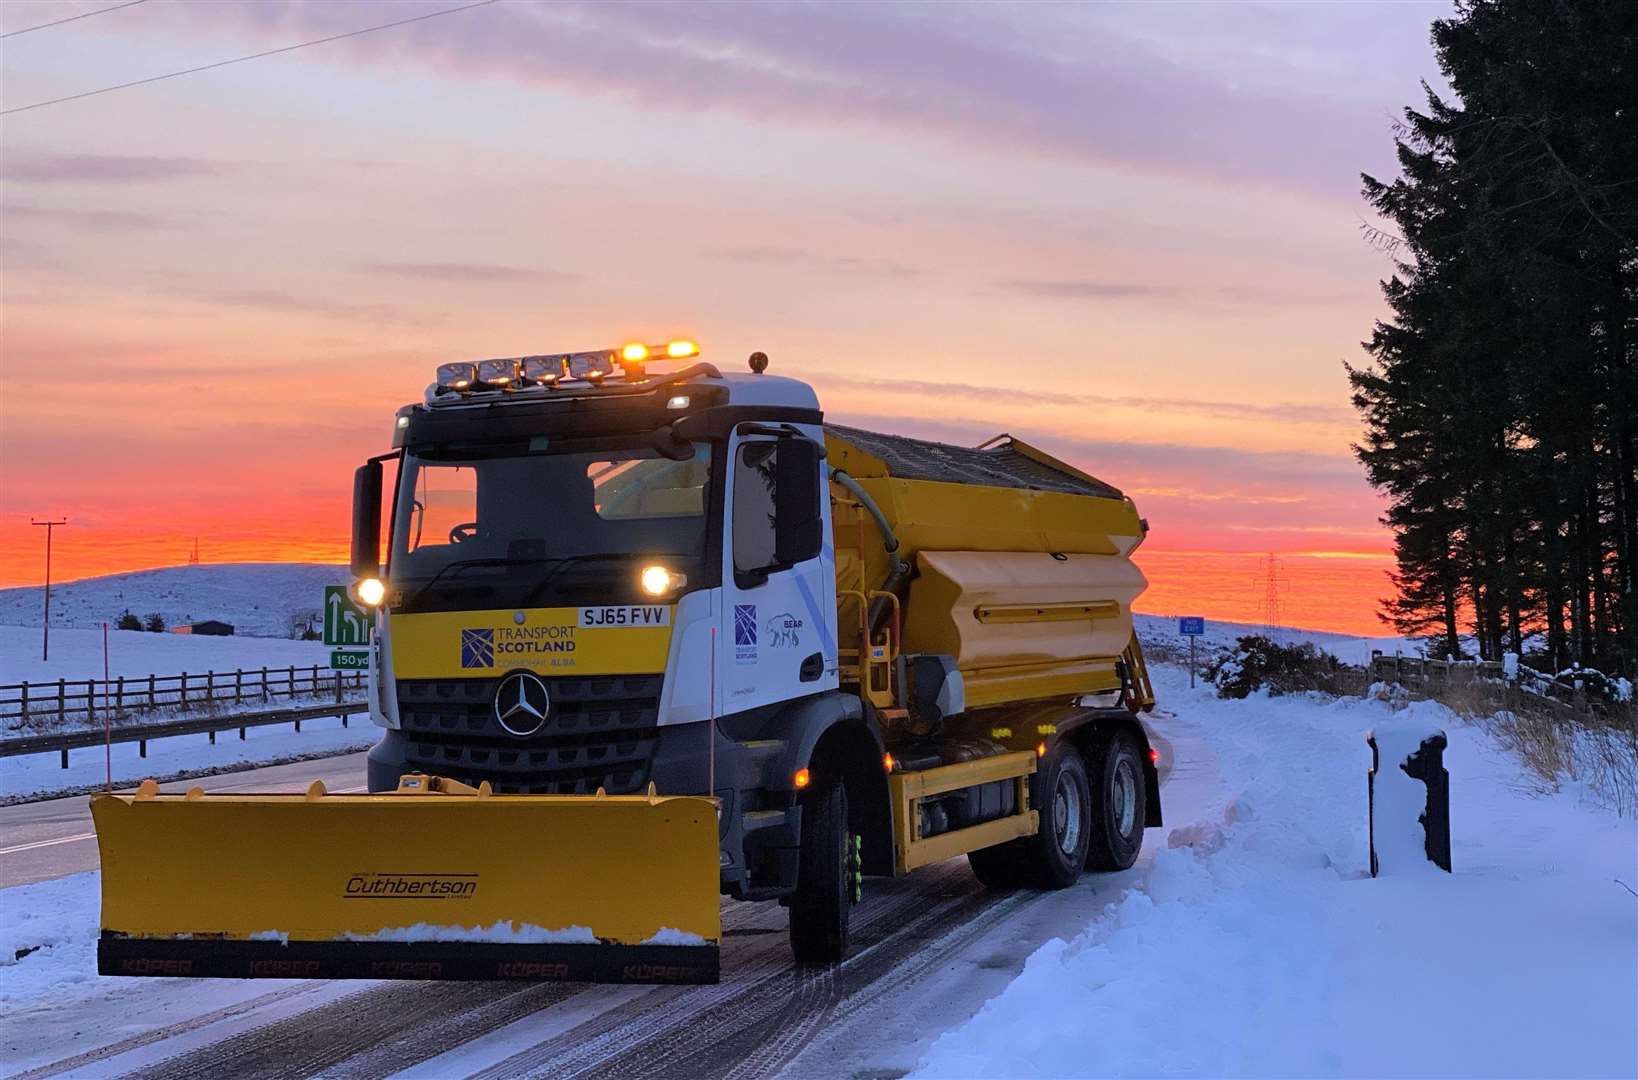 Hard work for winter teams to keep trunk roads safe this winter.